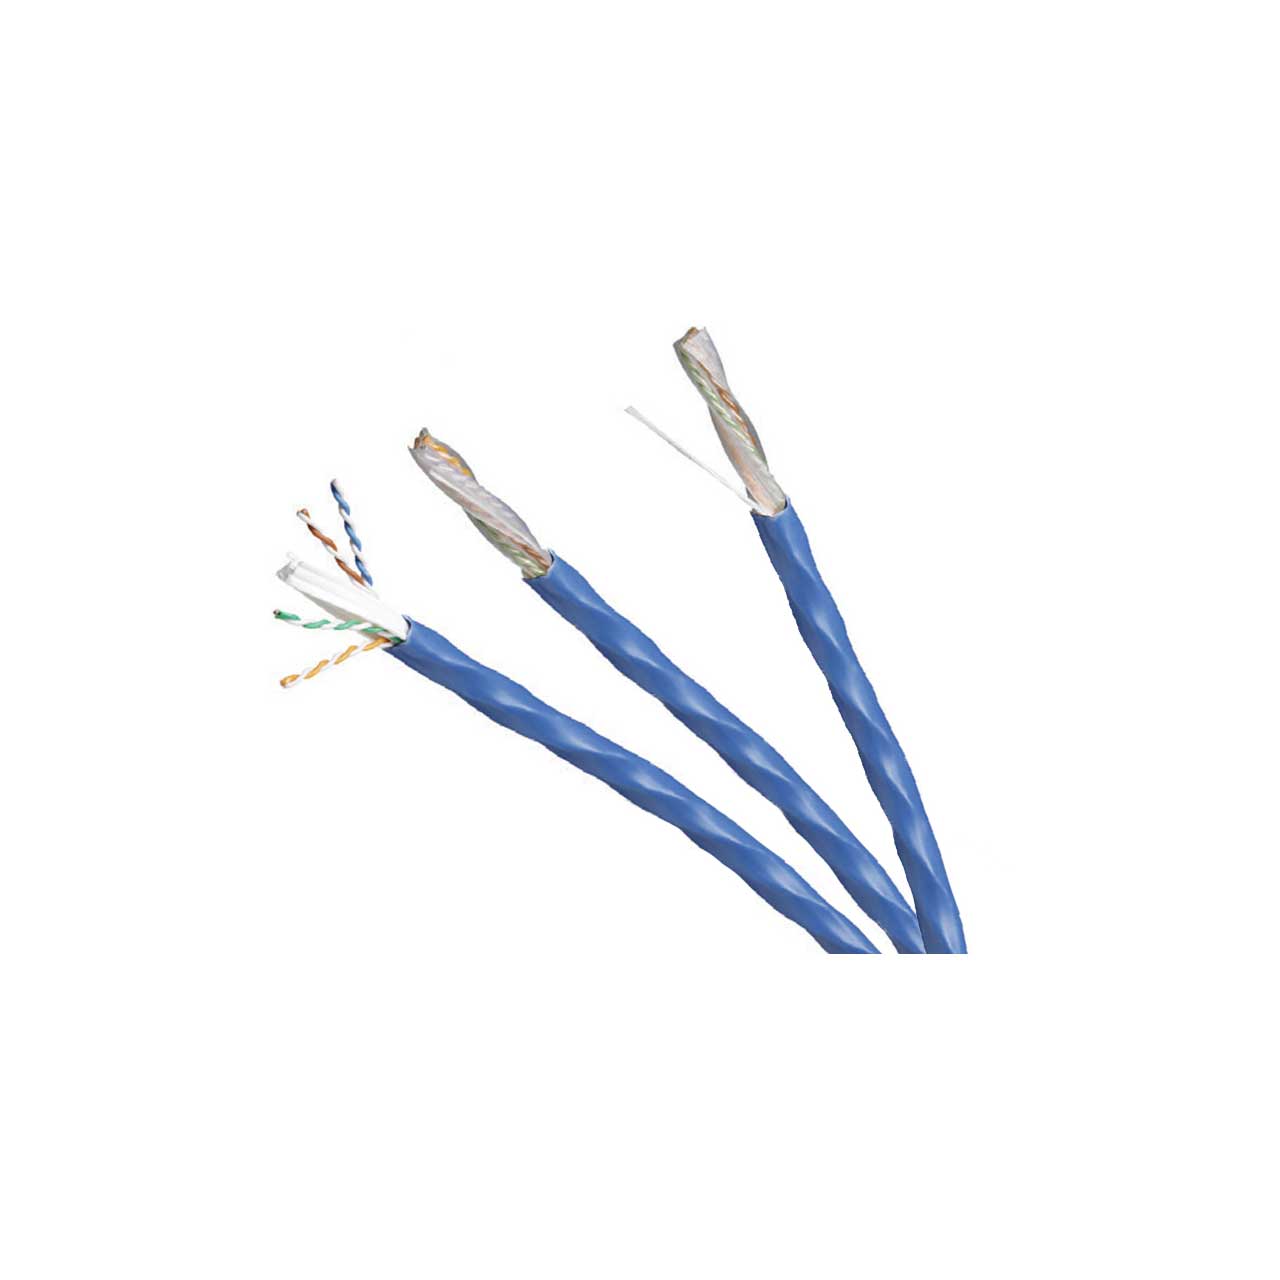 Belden 10GX12 23 AWG 4 Pair Enhanced Category 6A Cable - Blue - 80 Foot Unterminated BL-10GX12-80-BE